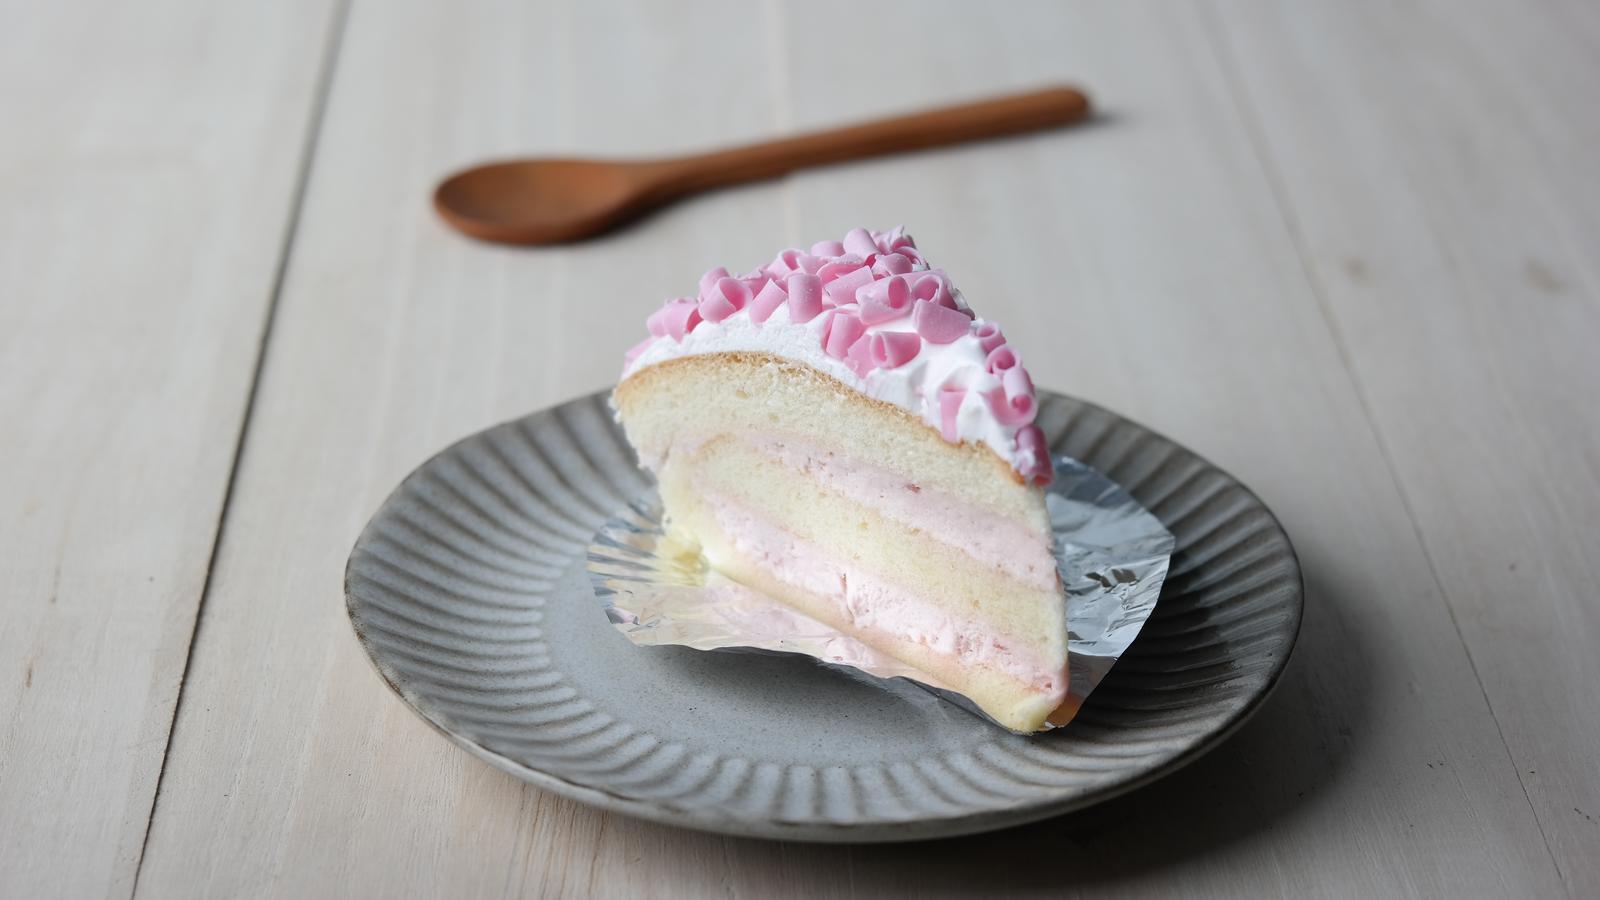 What Summer Food Are You? Quiz Vanilla cake with ruby chocolate shavings